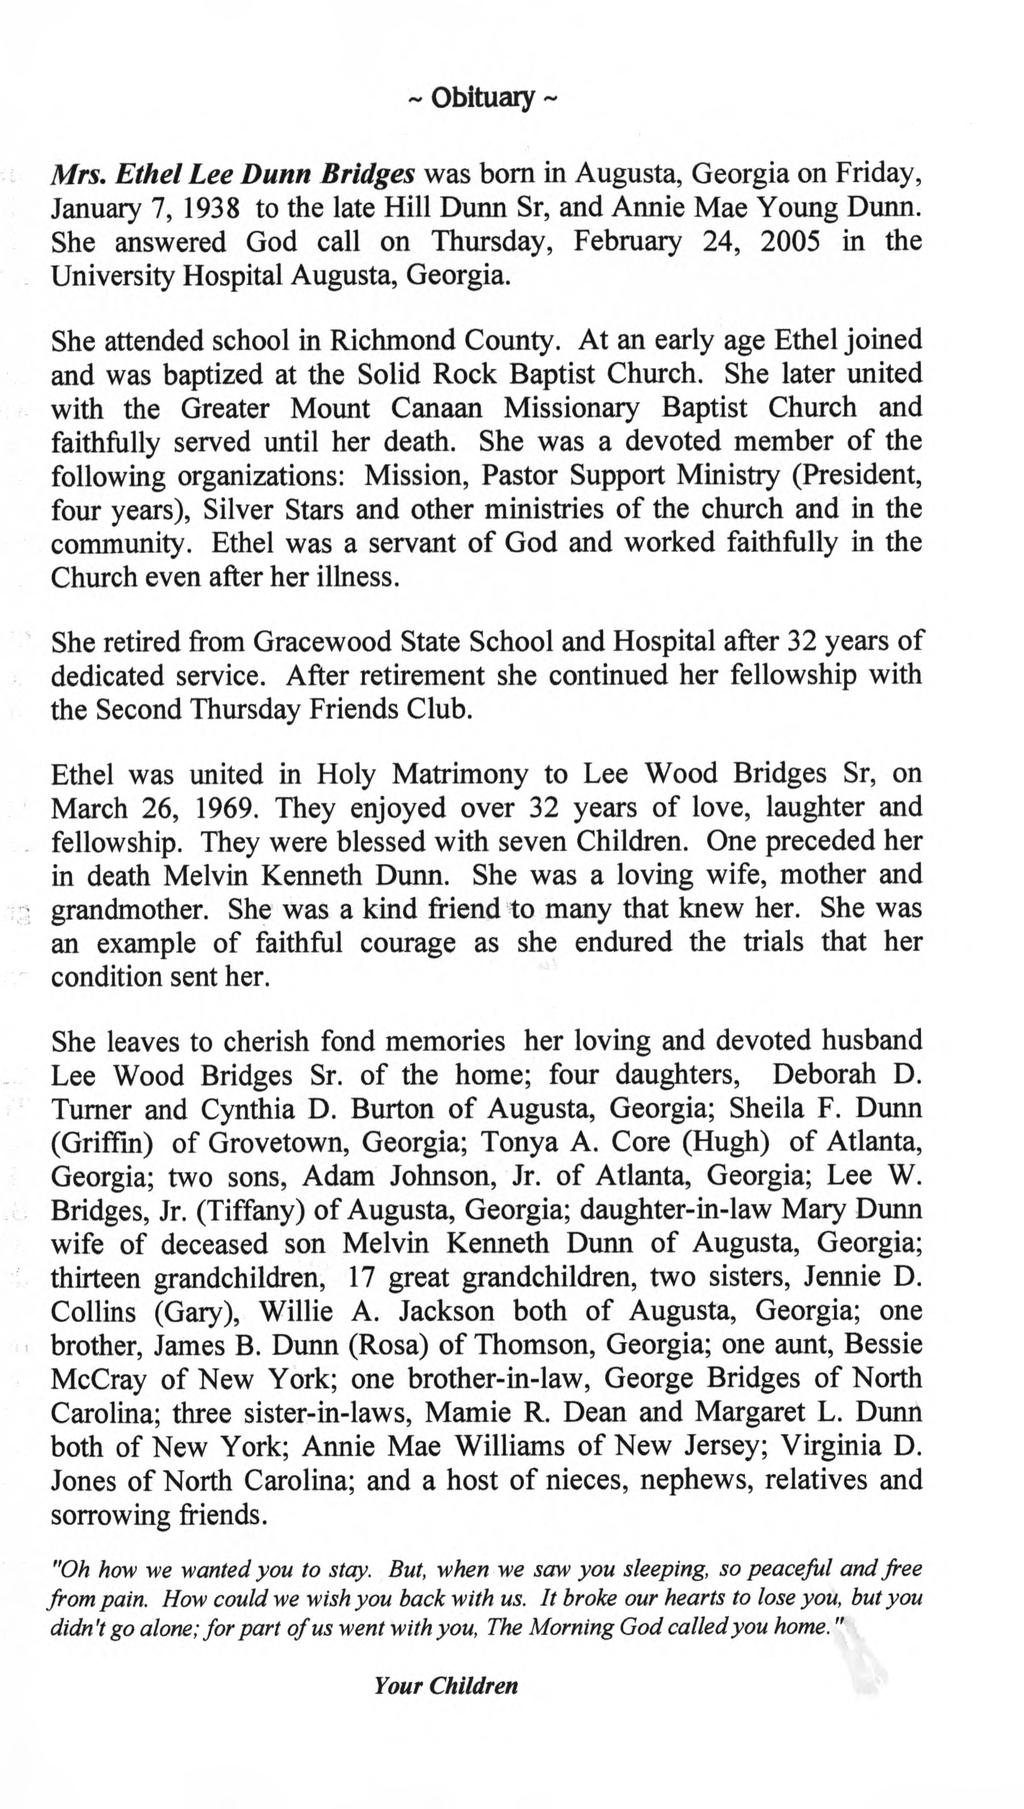 ~ Obituary ~ Mrs. Ethel Lee Dunn Bridges was born in Augusta, Georgia on Friday, January 7, 1938 to the late Hill Dunn Sr, and Annie Mae Young Dunn.